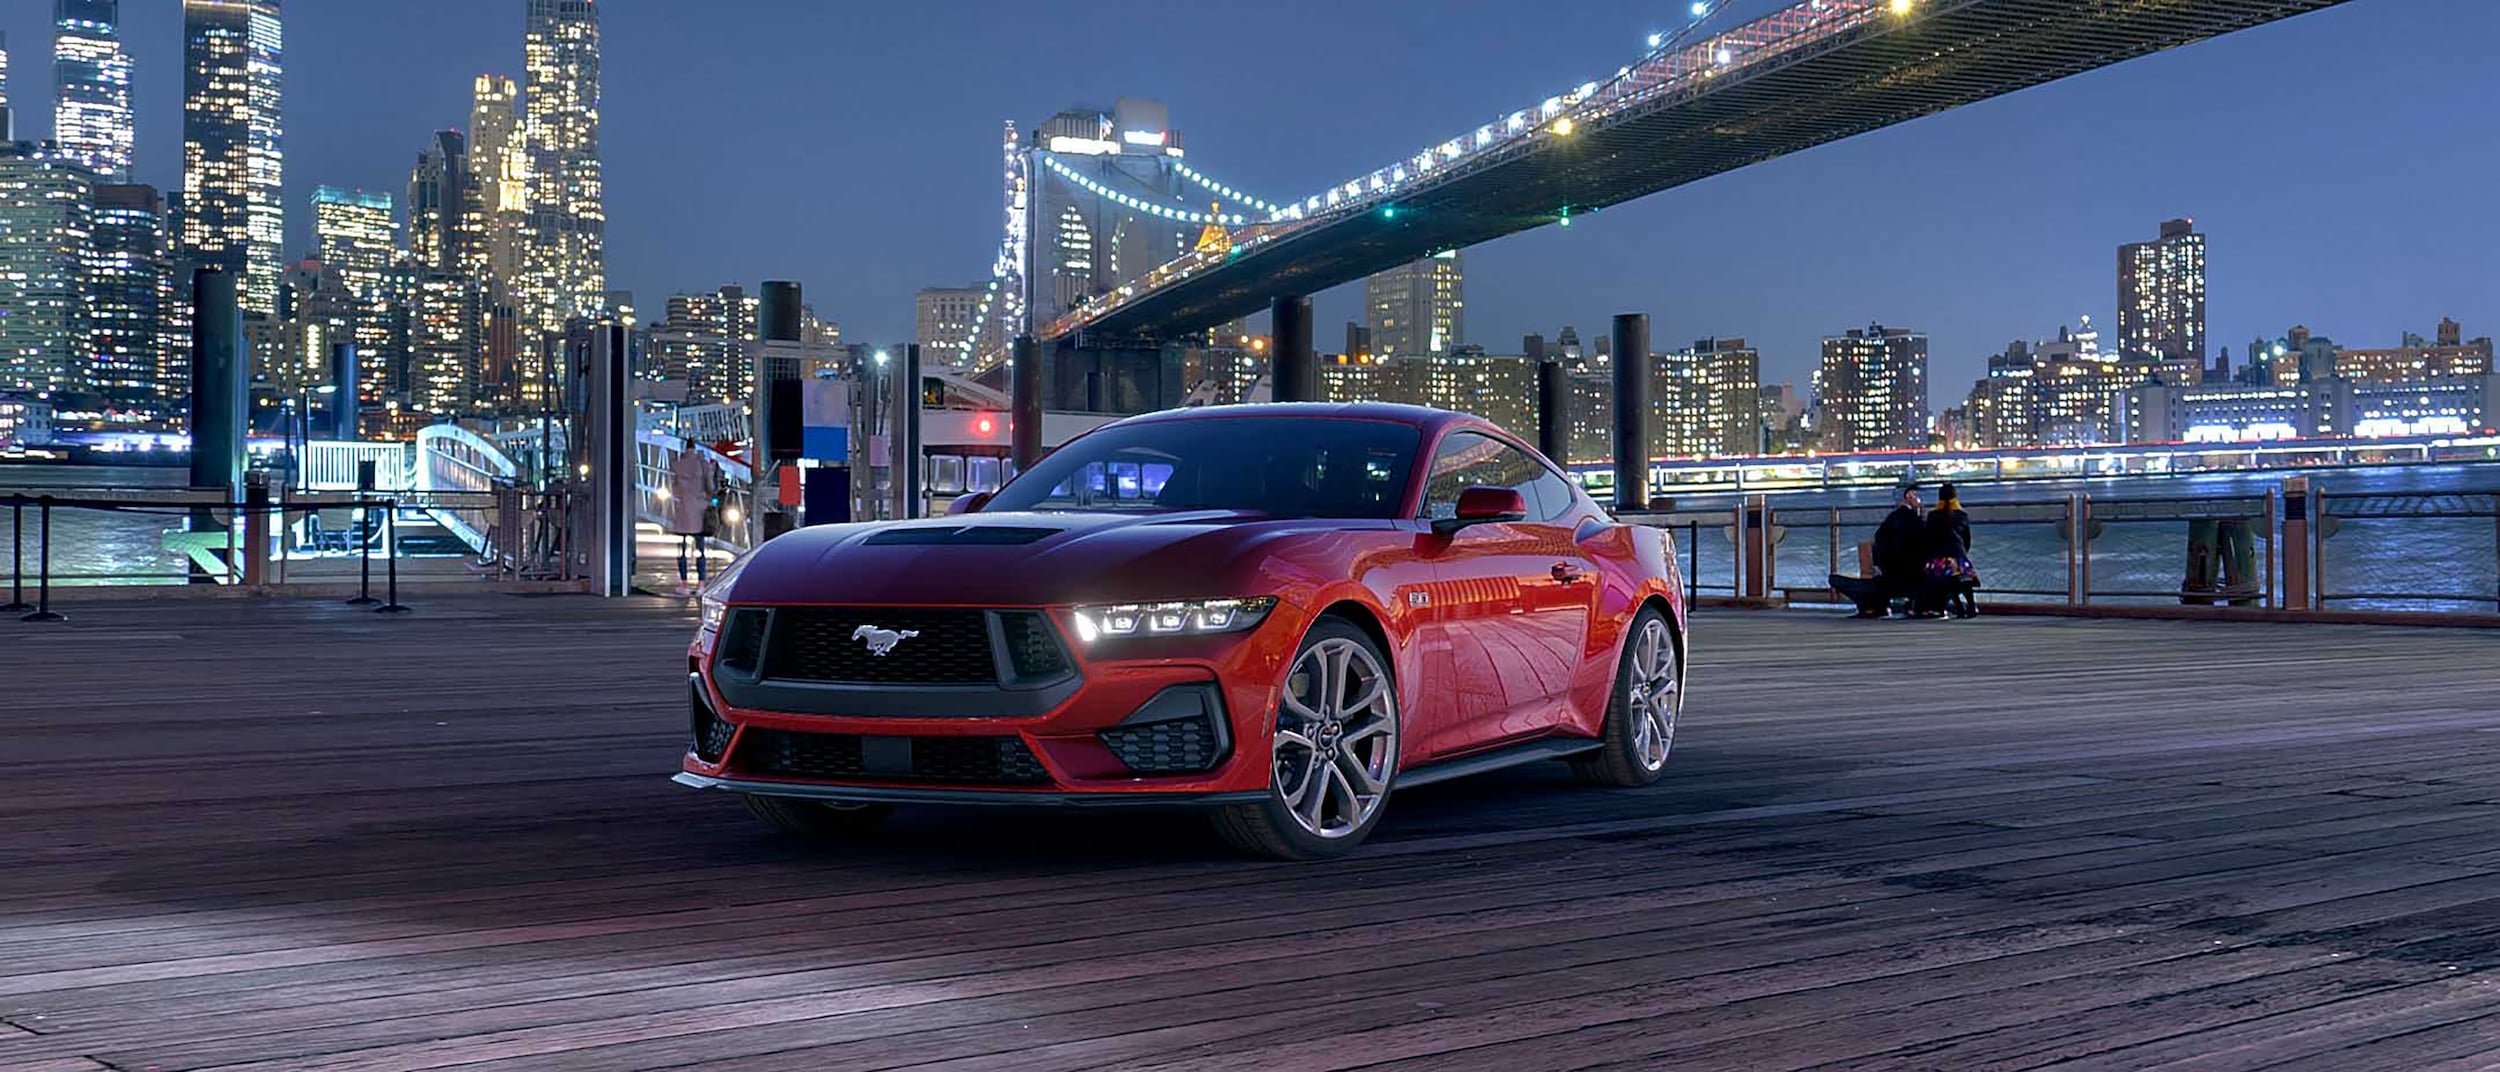 Show Stopper: 2024 Ford Mustang GT Tested